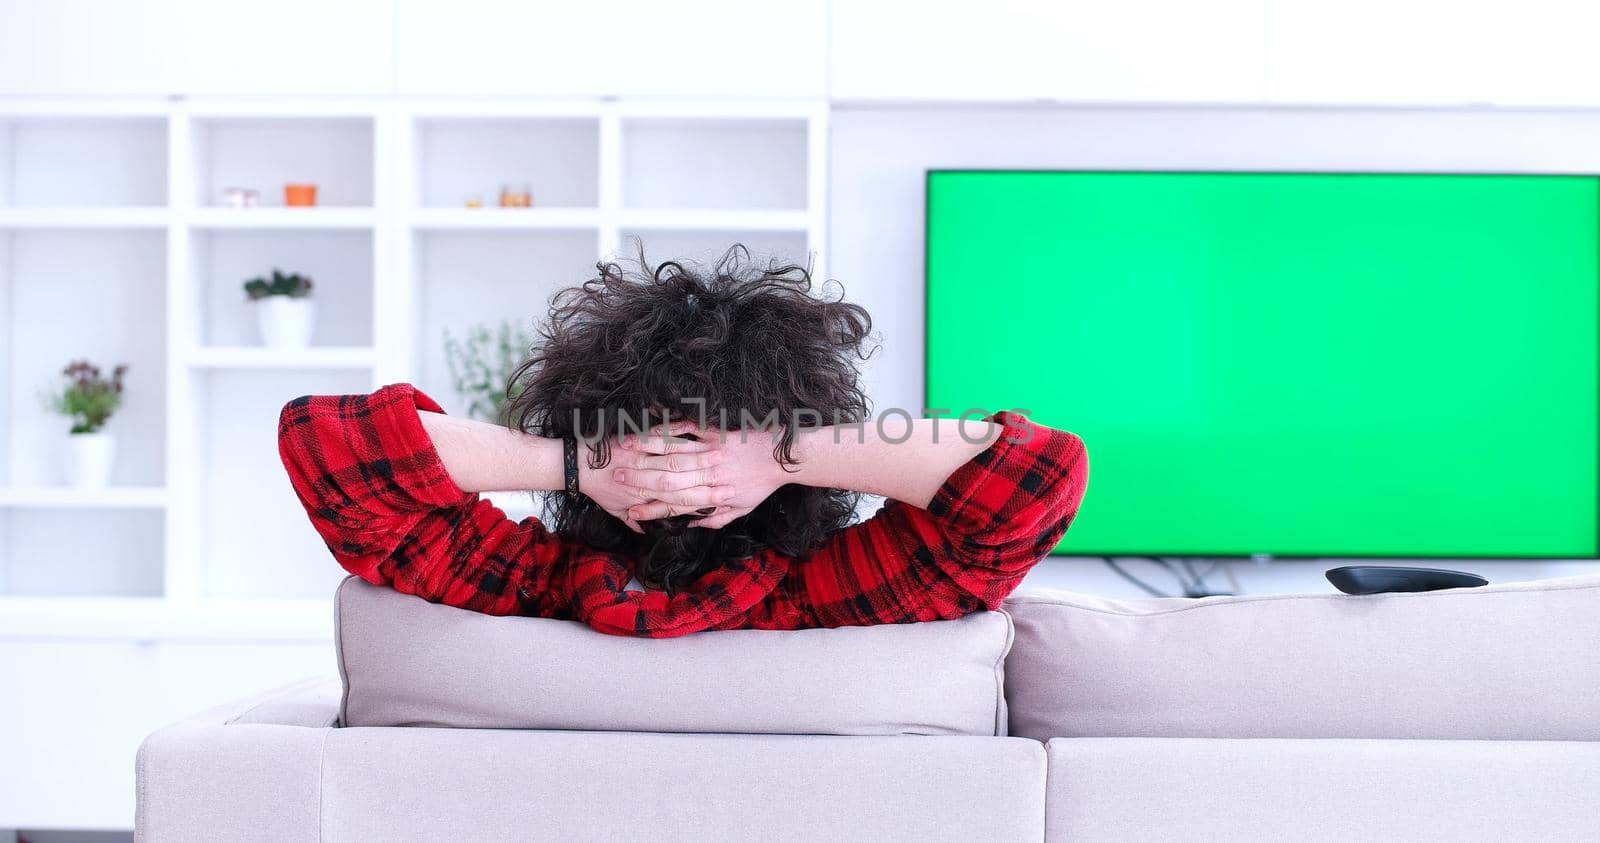 young handsome man enjoying free time watching television in his luxury home villa